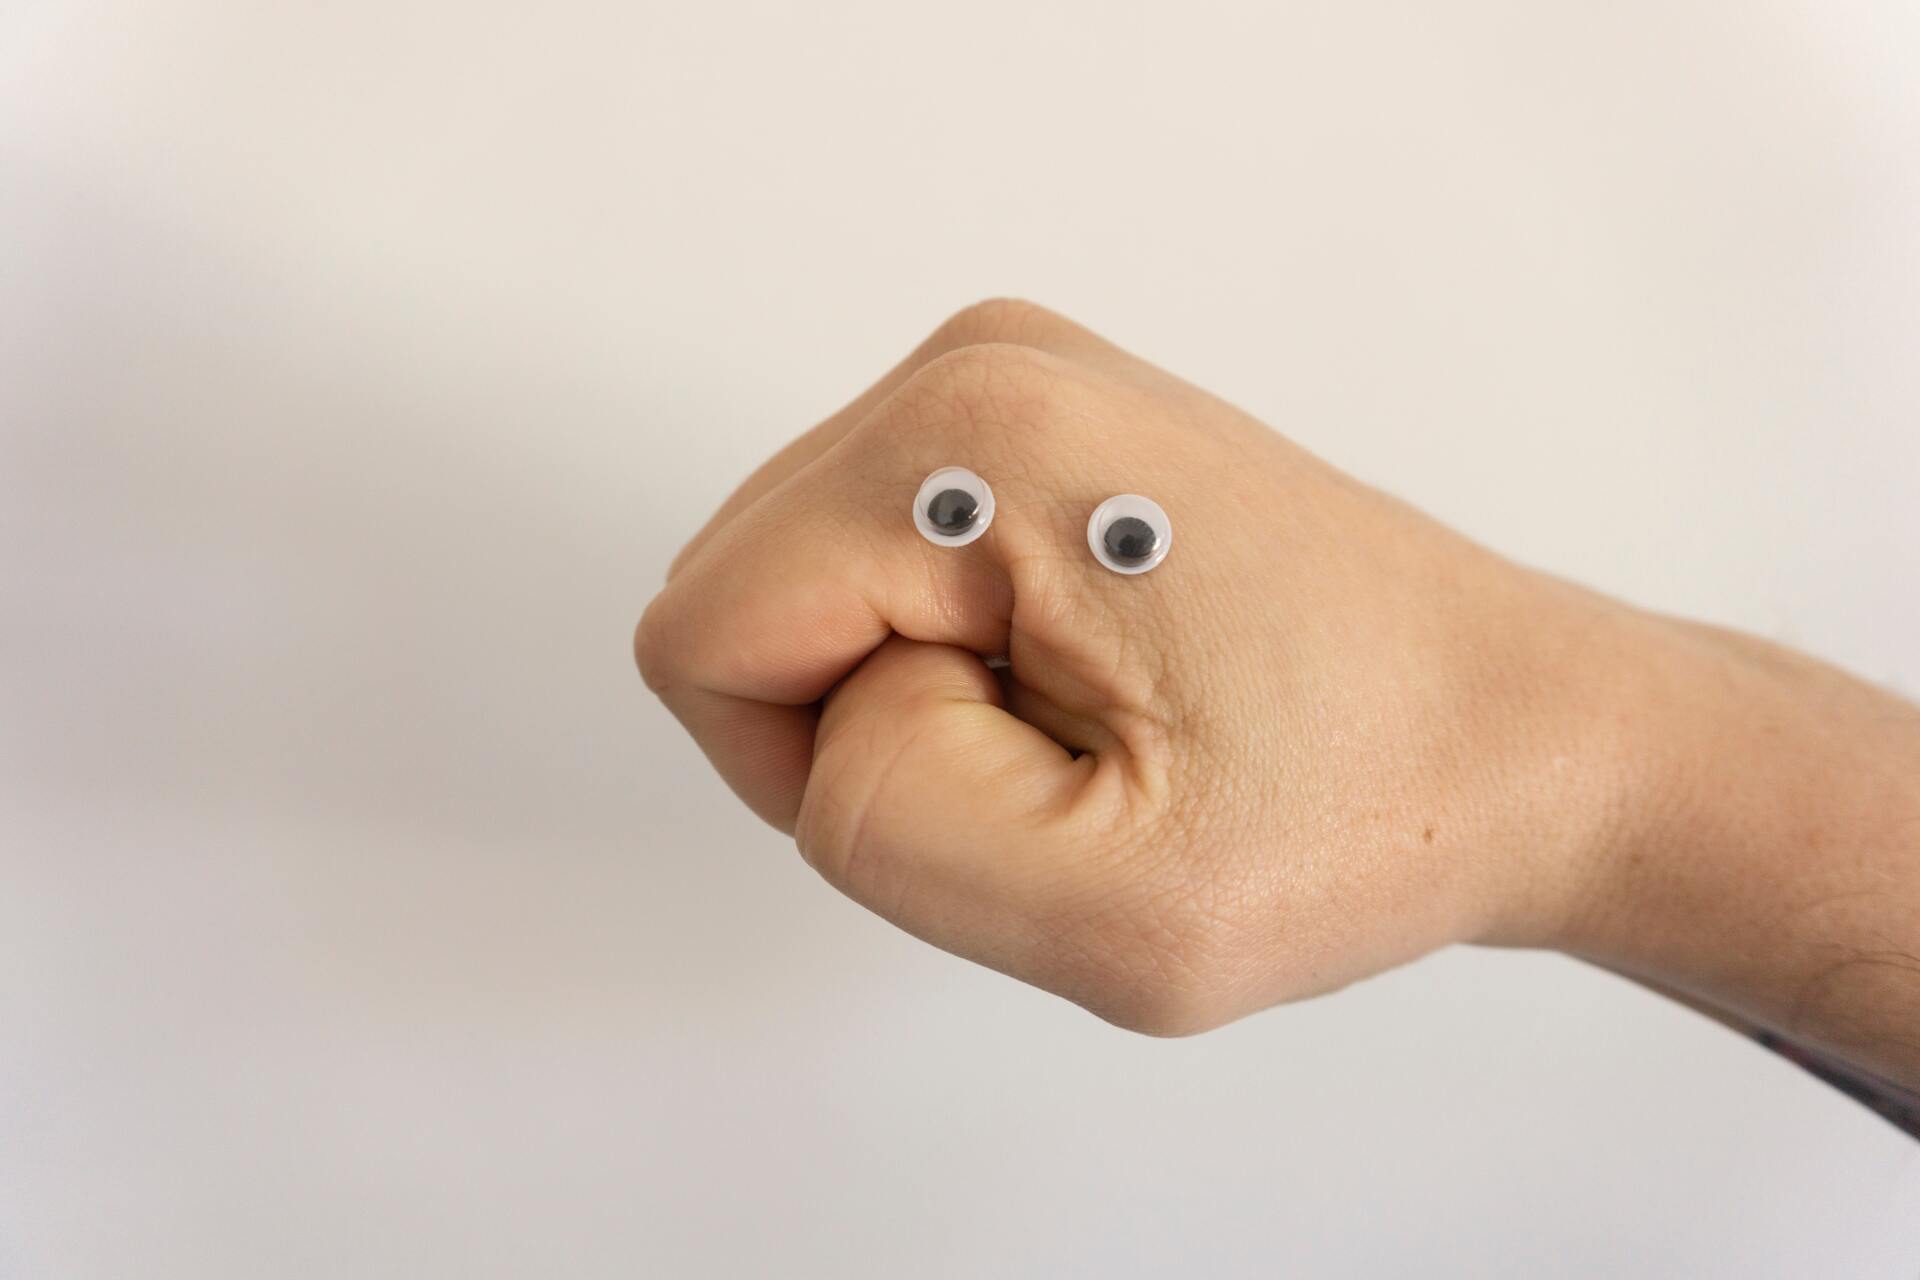 a simple puppet created by putting google eyes on a bare hand